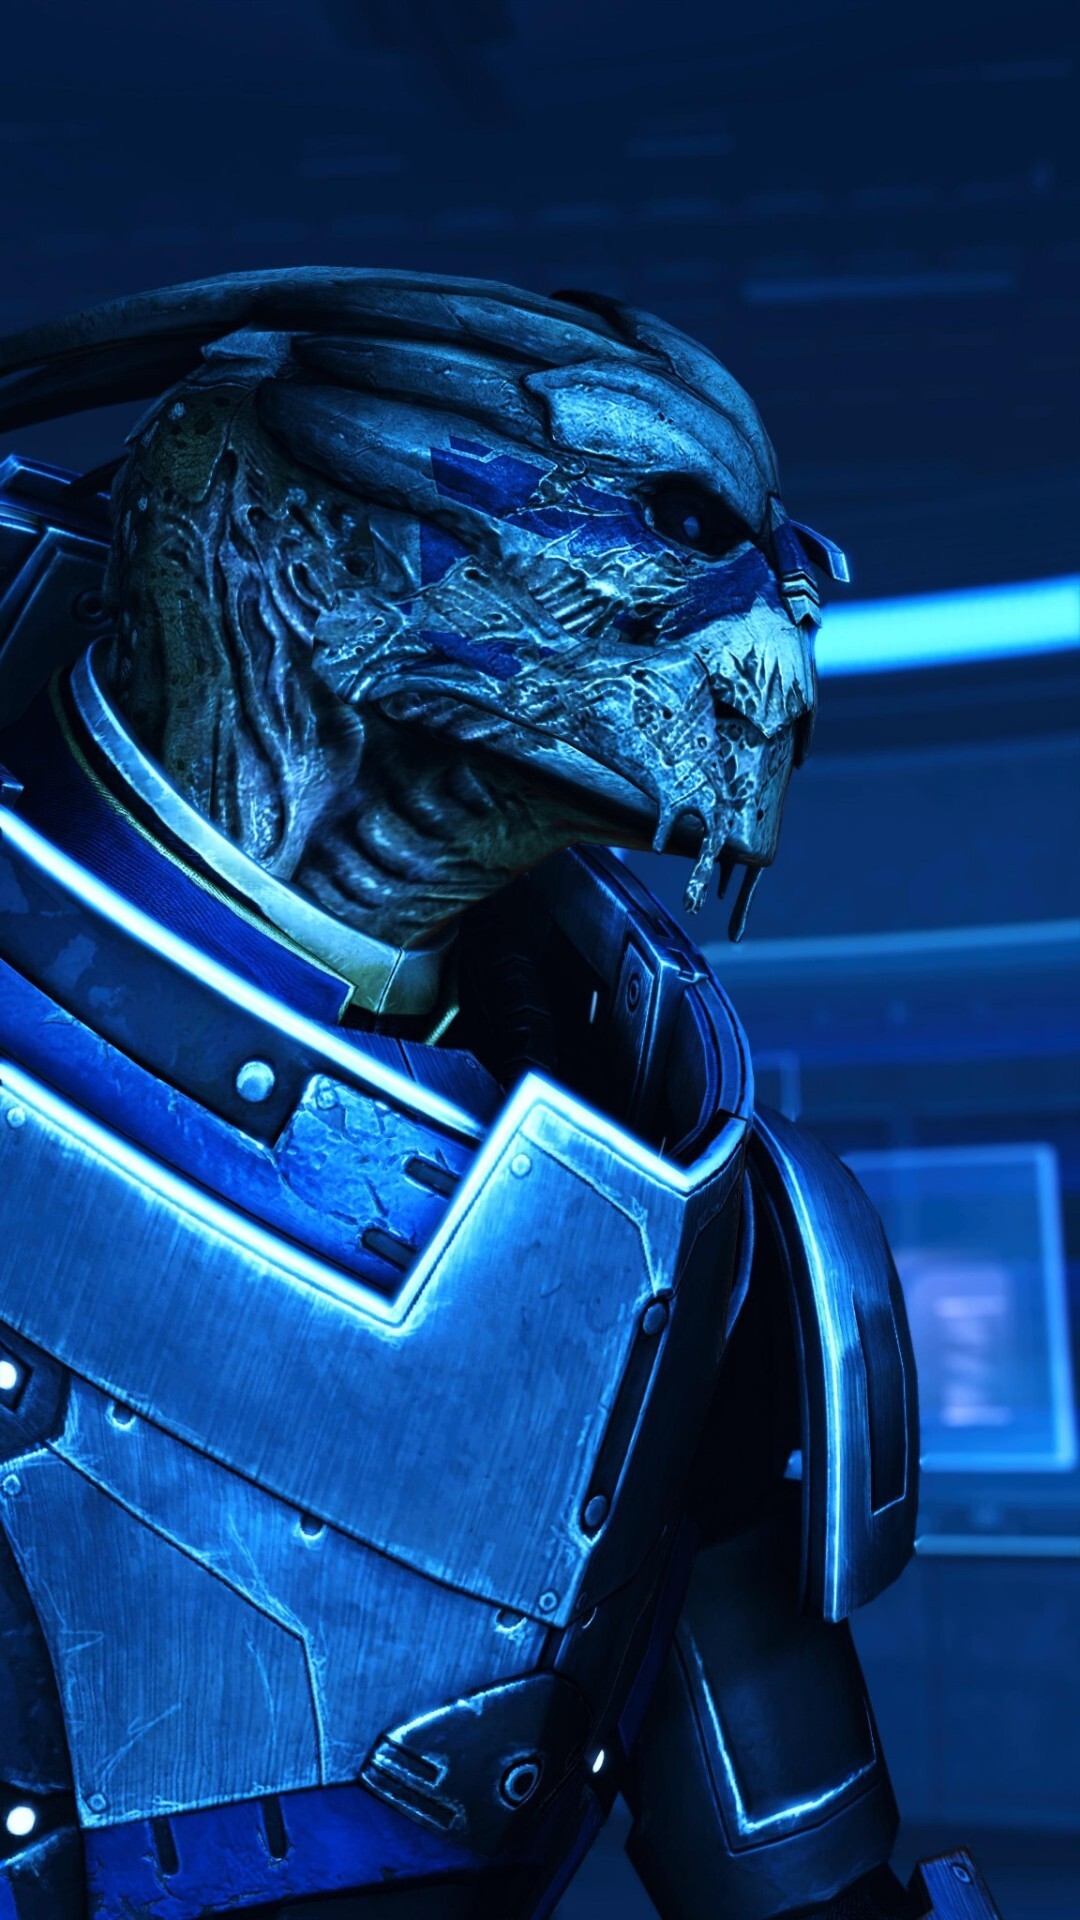 Garrus Vakarian: Mass Effect 3, Flying to Migrating Fleet to help TaliZorah in fighting the indoctrinated Geth. 1080x1920 Full HD Wallpaper.